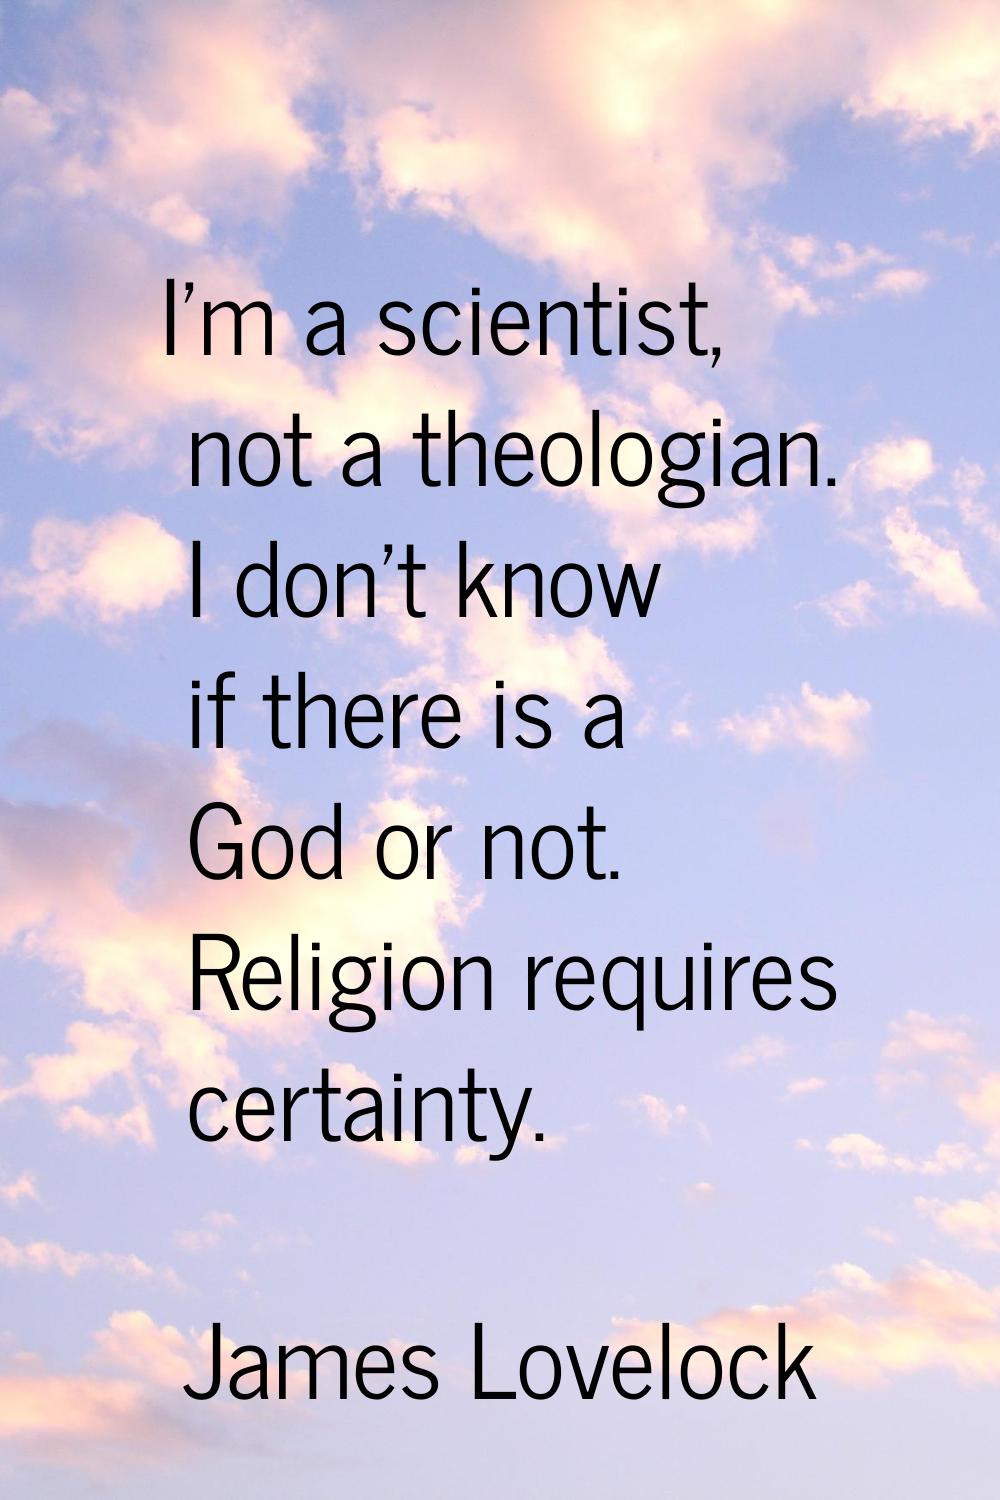 I'm a scientist, not a theologian. I don't know if there is a God or not. Religion requires certain